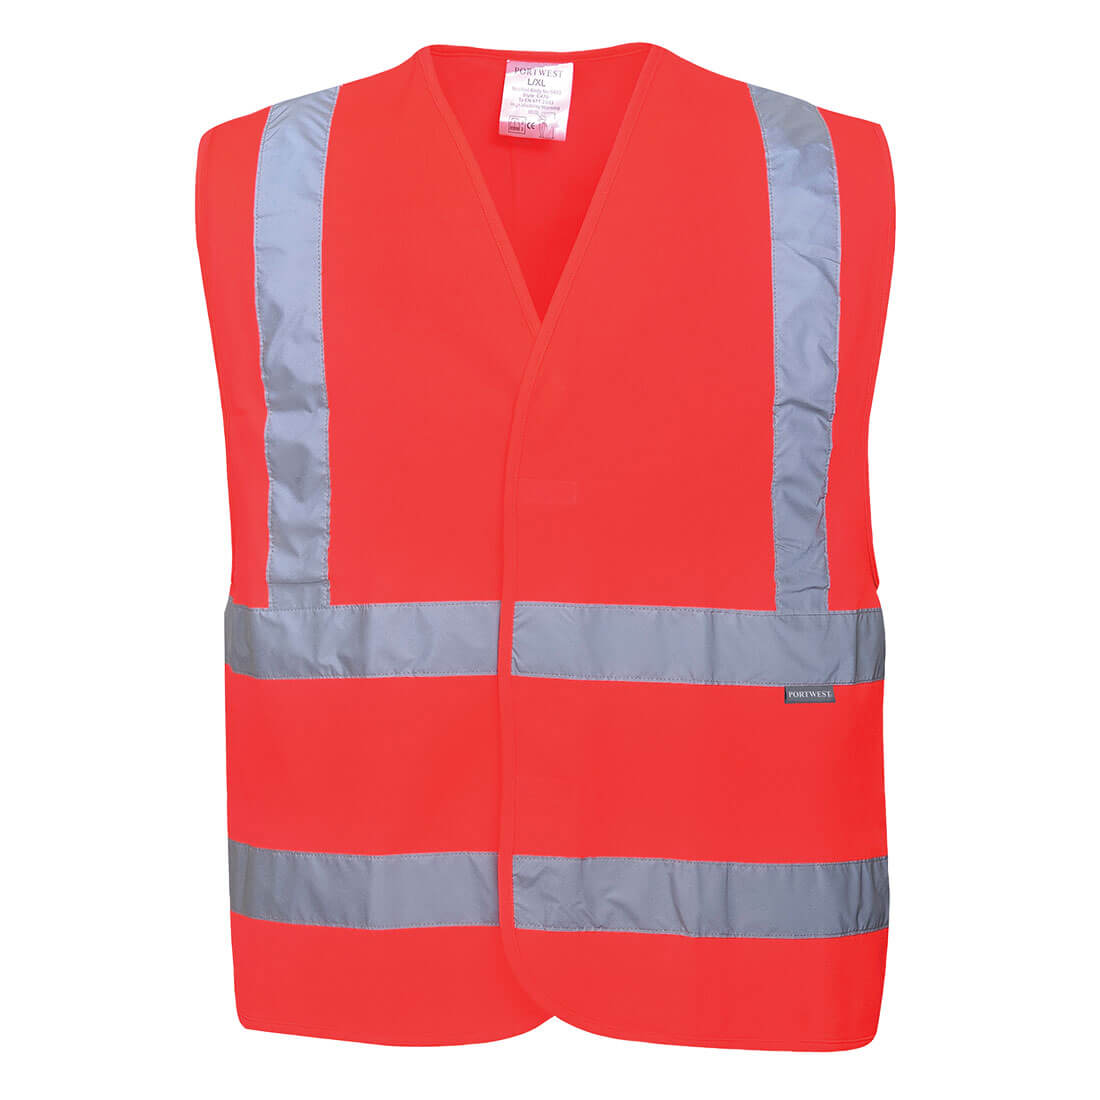 Image of Portwest Two Band and Brace Class 2 Hi Vis Waistcoat Red 2XL / 3XL